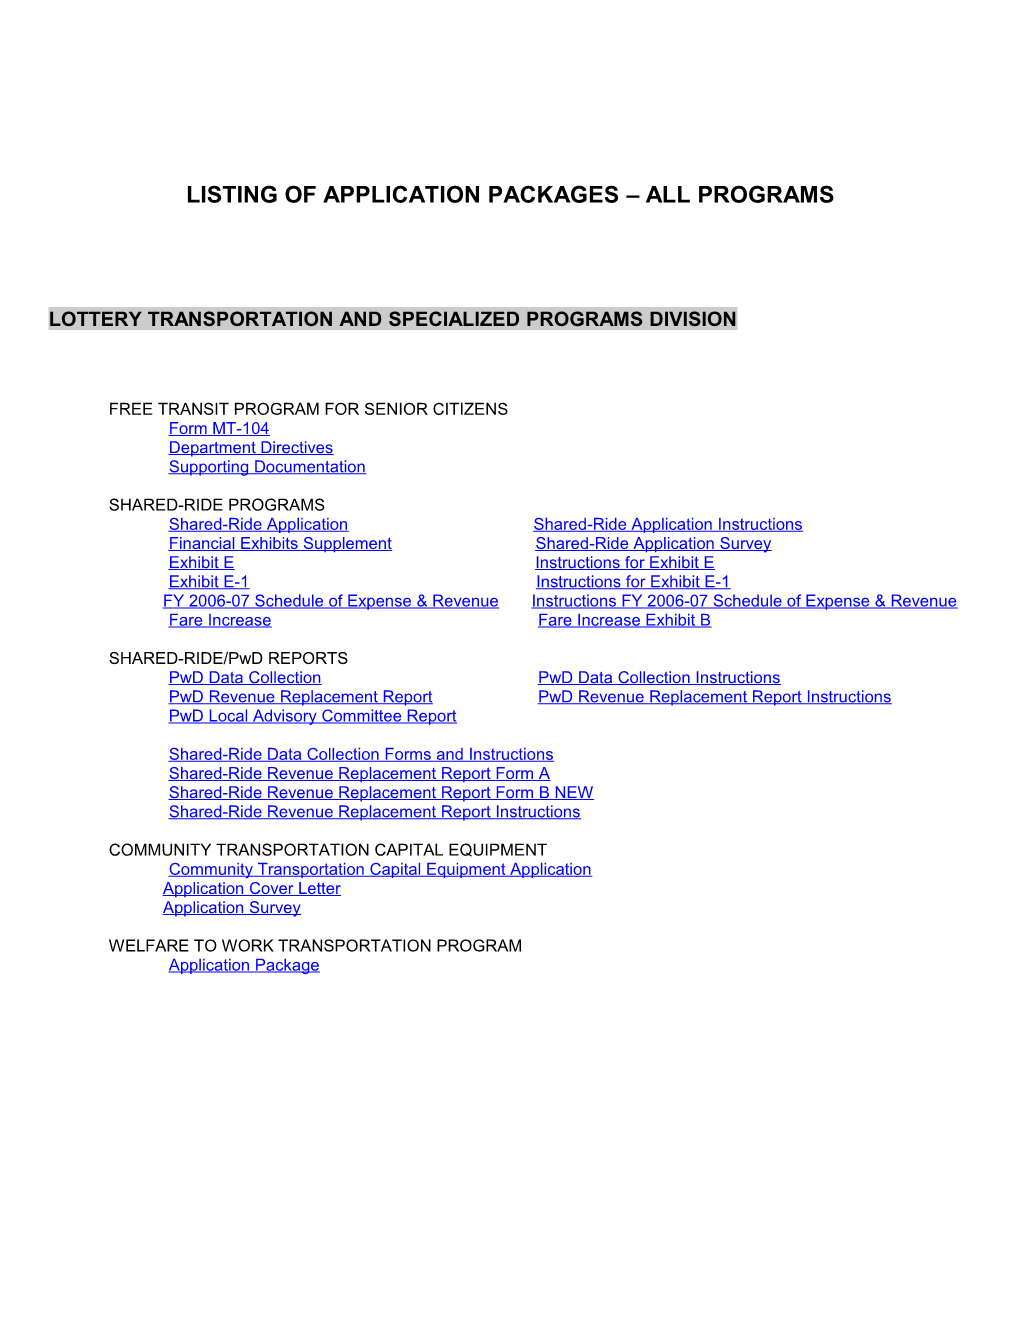 Listing of Application Packages All Programs